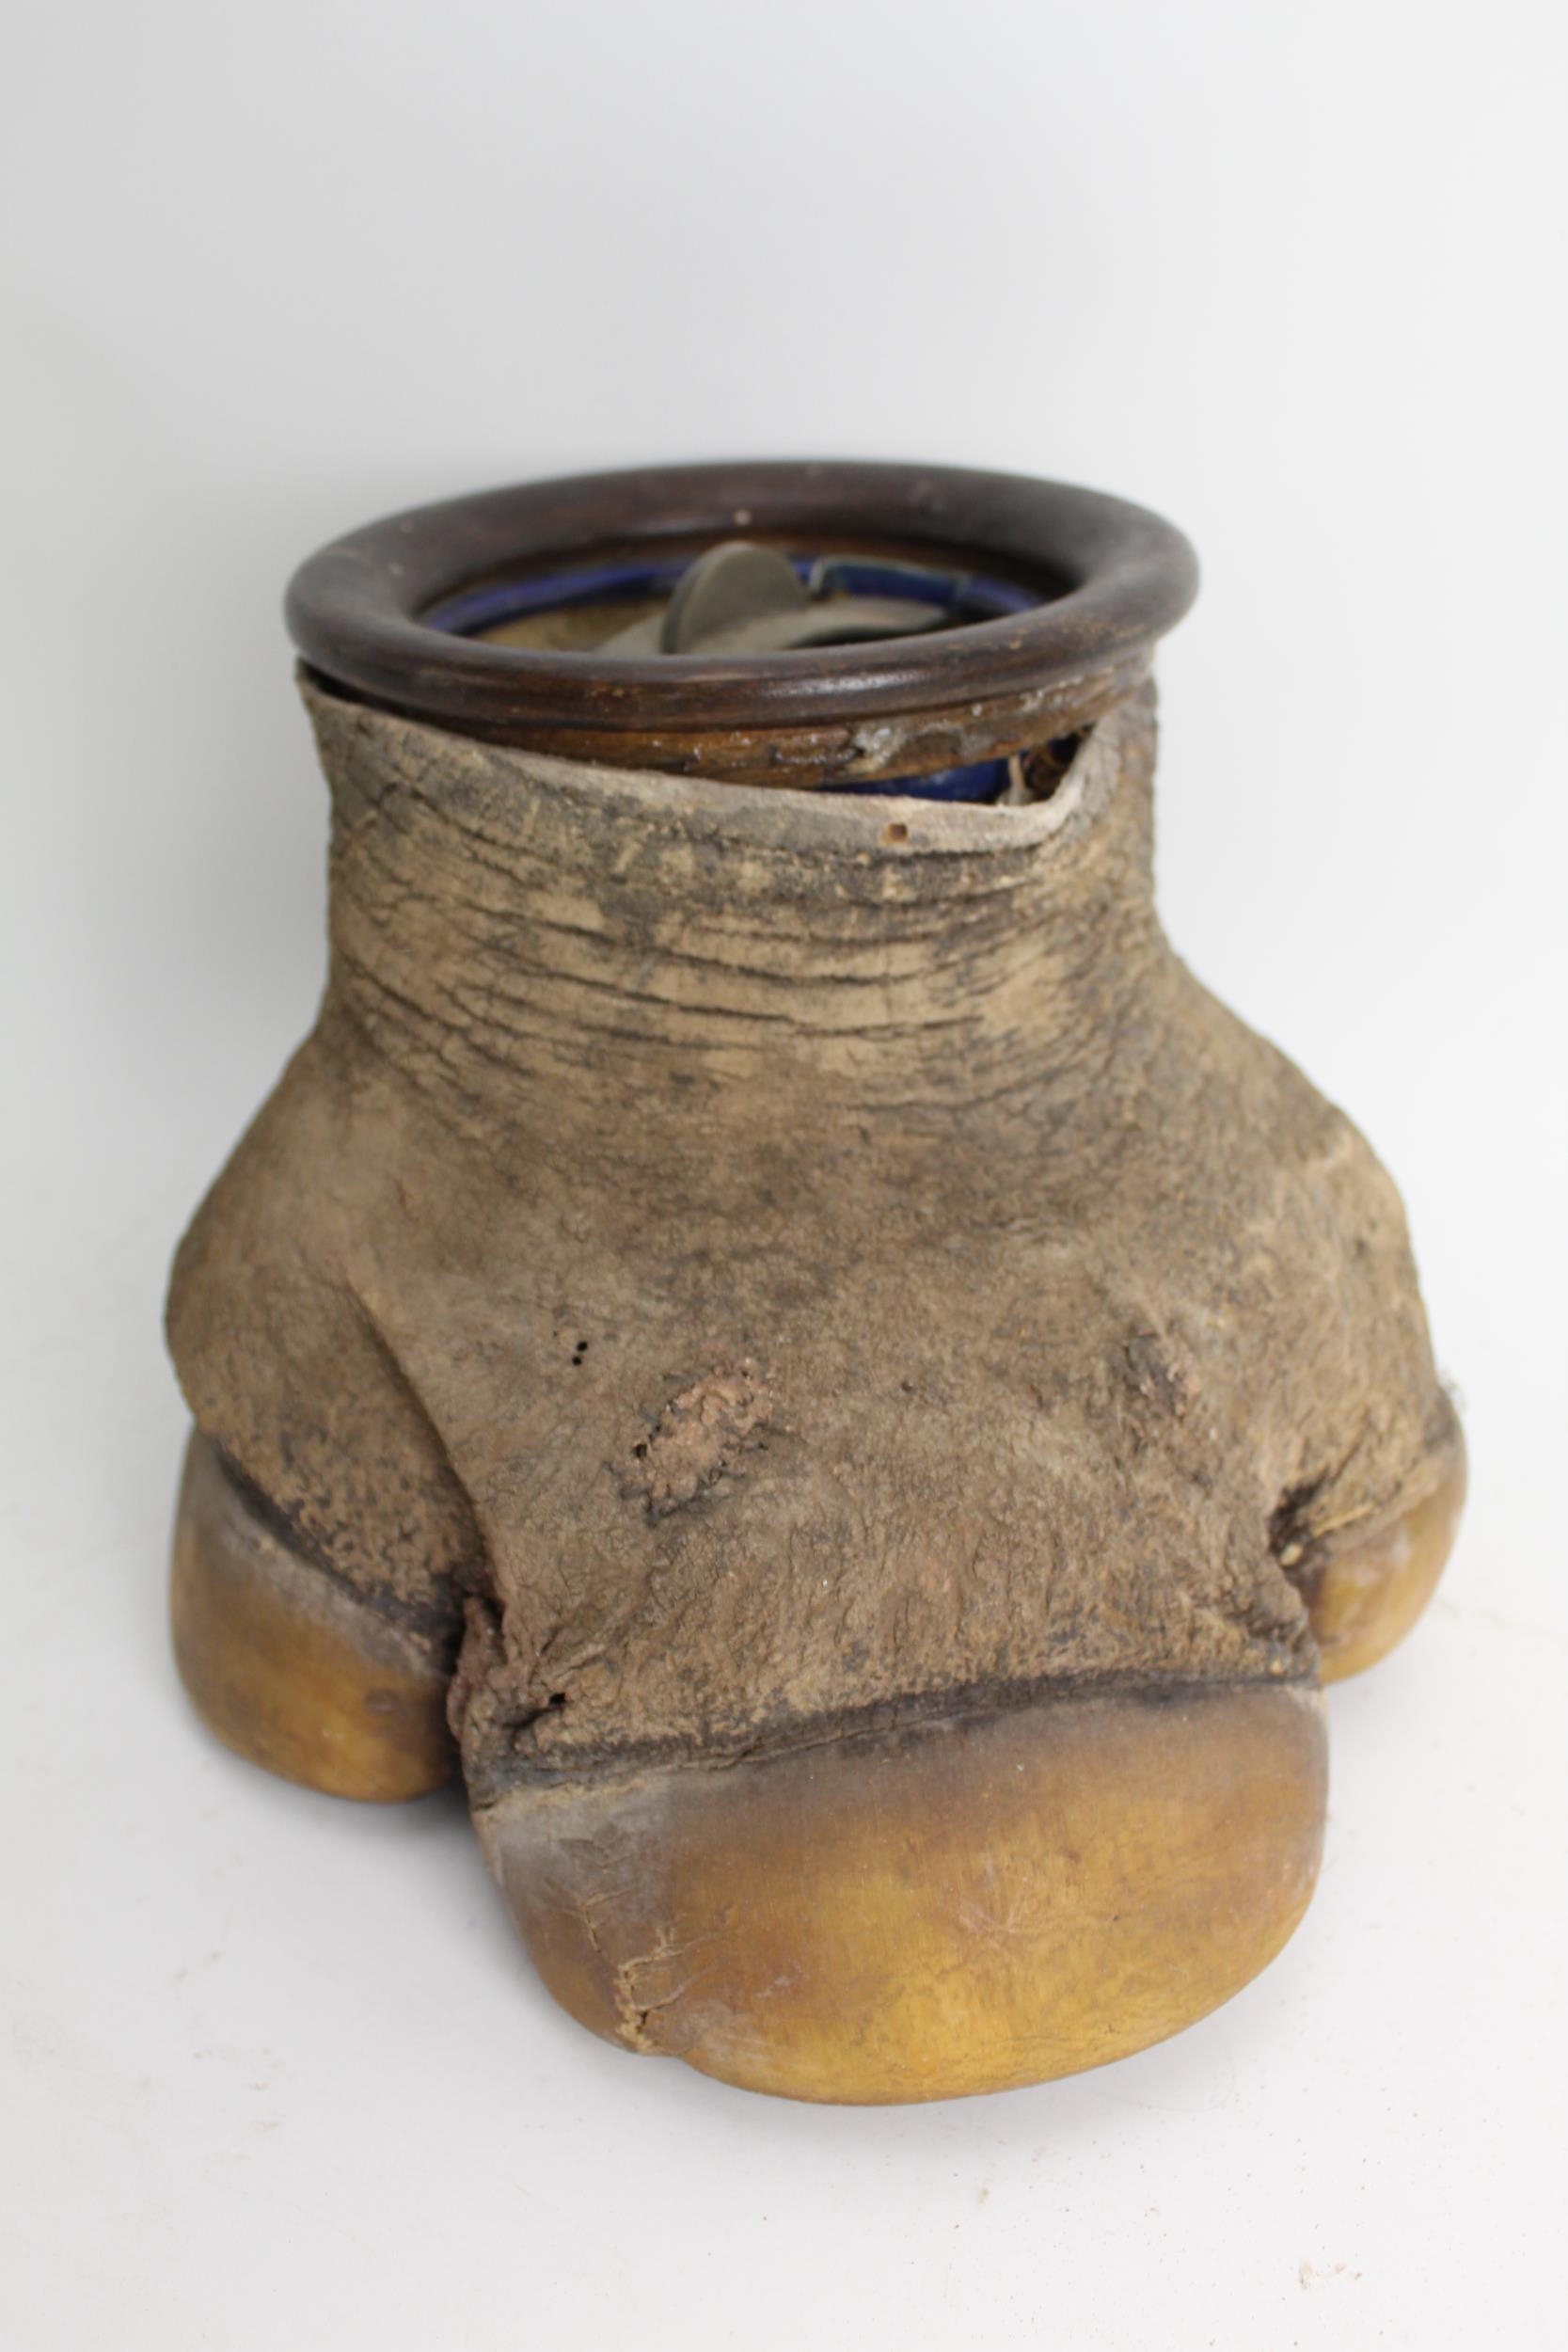 Taxidermy: An early 20th century rhinoceros foot, the centre holding a tobacco jar